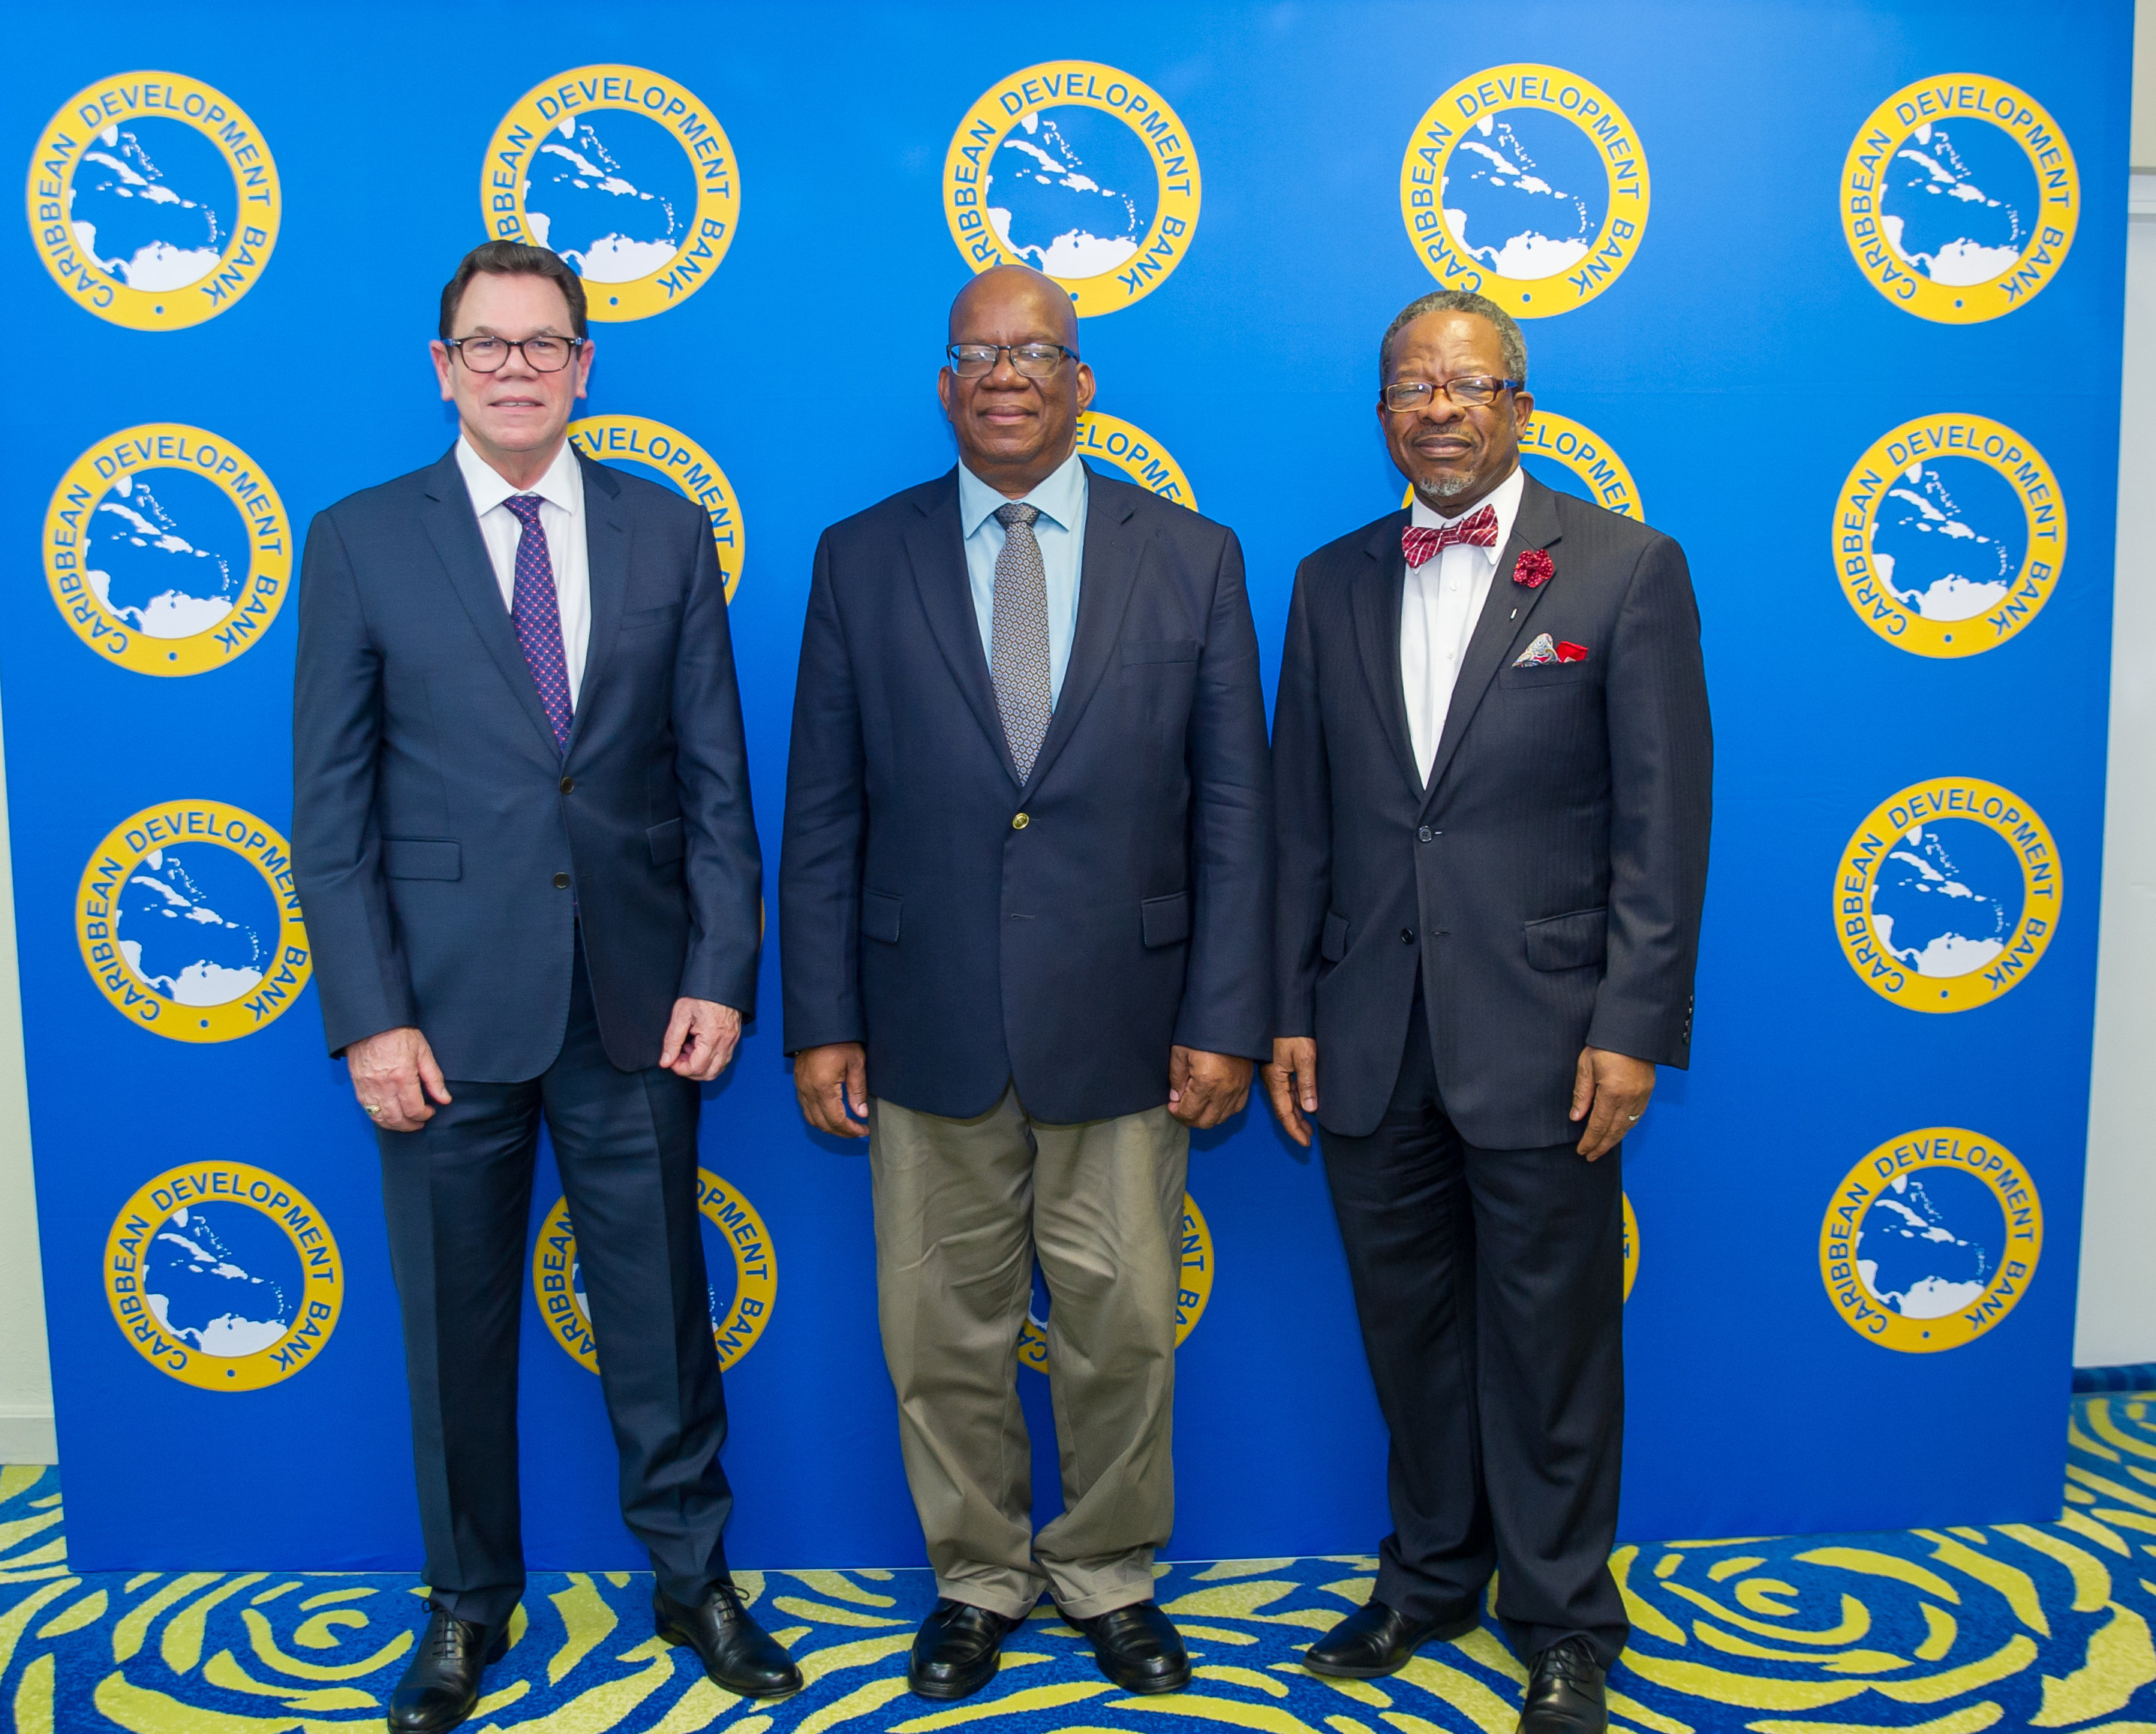 (L-R) Dr. Wm. Warren Smith, President, CDB; Hon. Winston Jordan, Minister of Finance, Guyana and Ivelaw Lloyd Griffith, Vice-Chancellor of the University of Guyana, at the signing of the grant agreement.